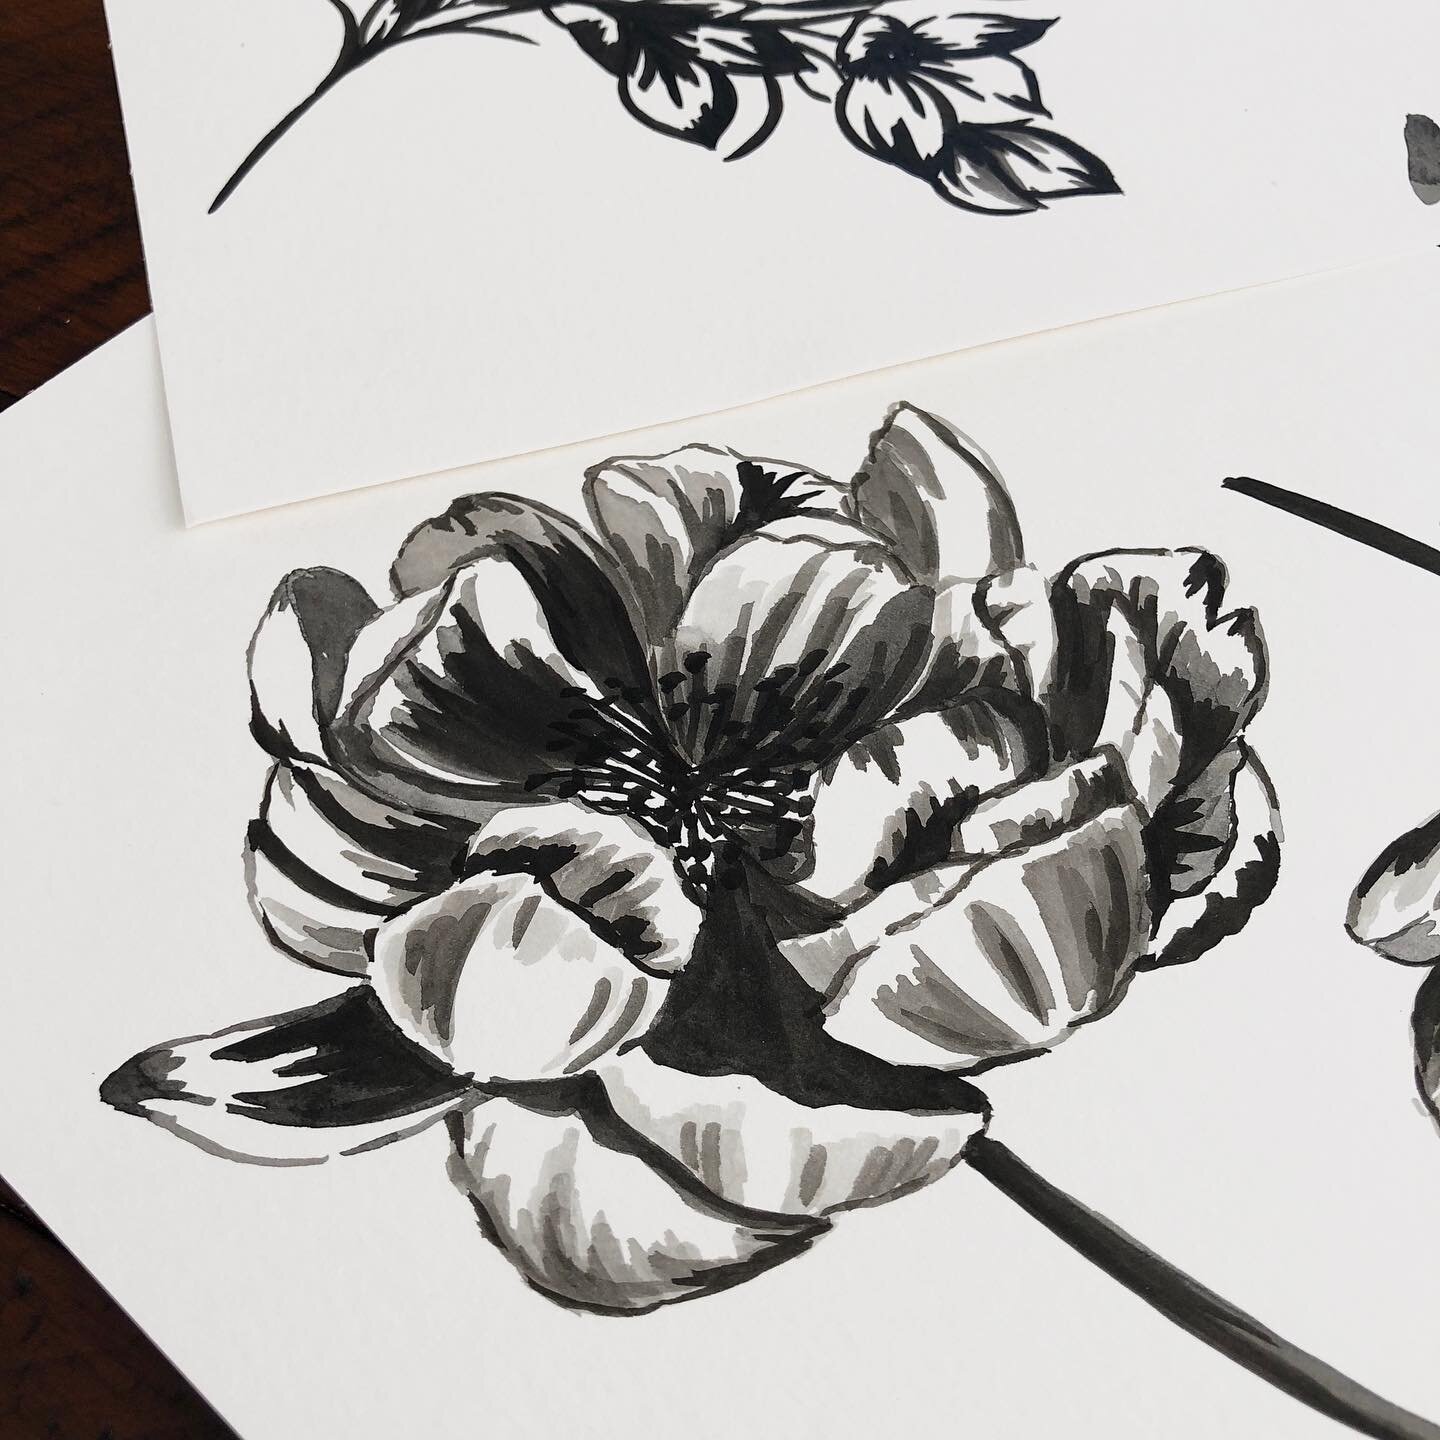 Day 94/100...Black and white flowers  #watercolorflowers #floralpainting #floralsketch #sumiink #watercolorfloral  #everydaywatercolor #princetonbrushes #flower #floralart #flowerdrawing #floral #floraldrawing #peony #greyscale #botanical #botanicals